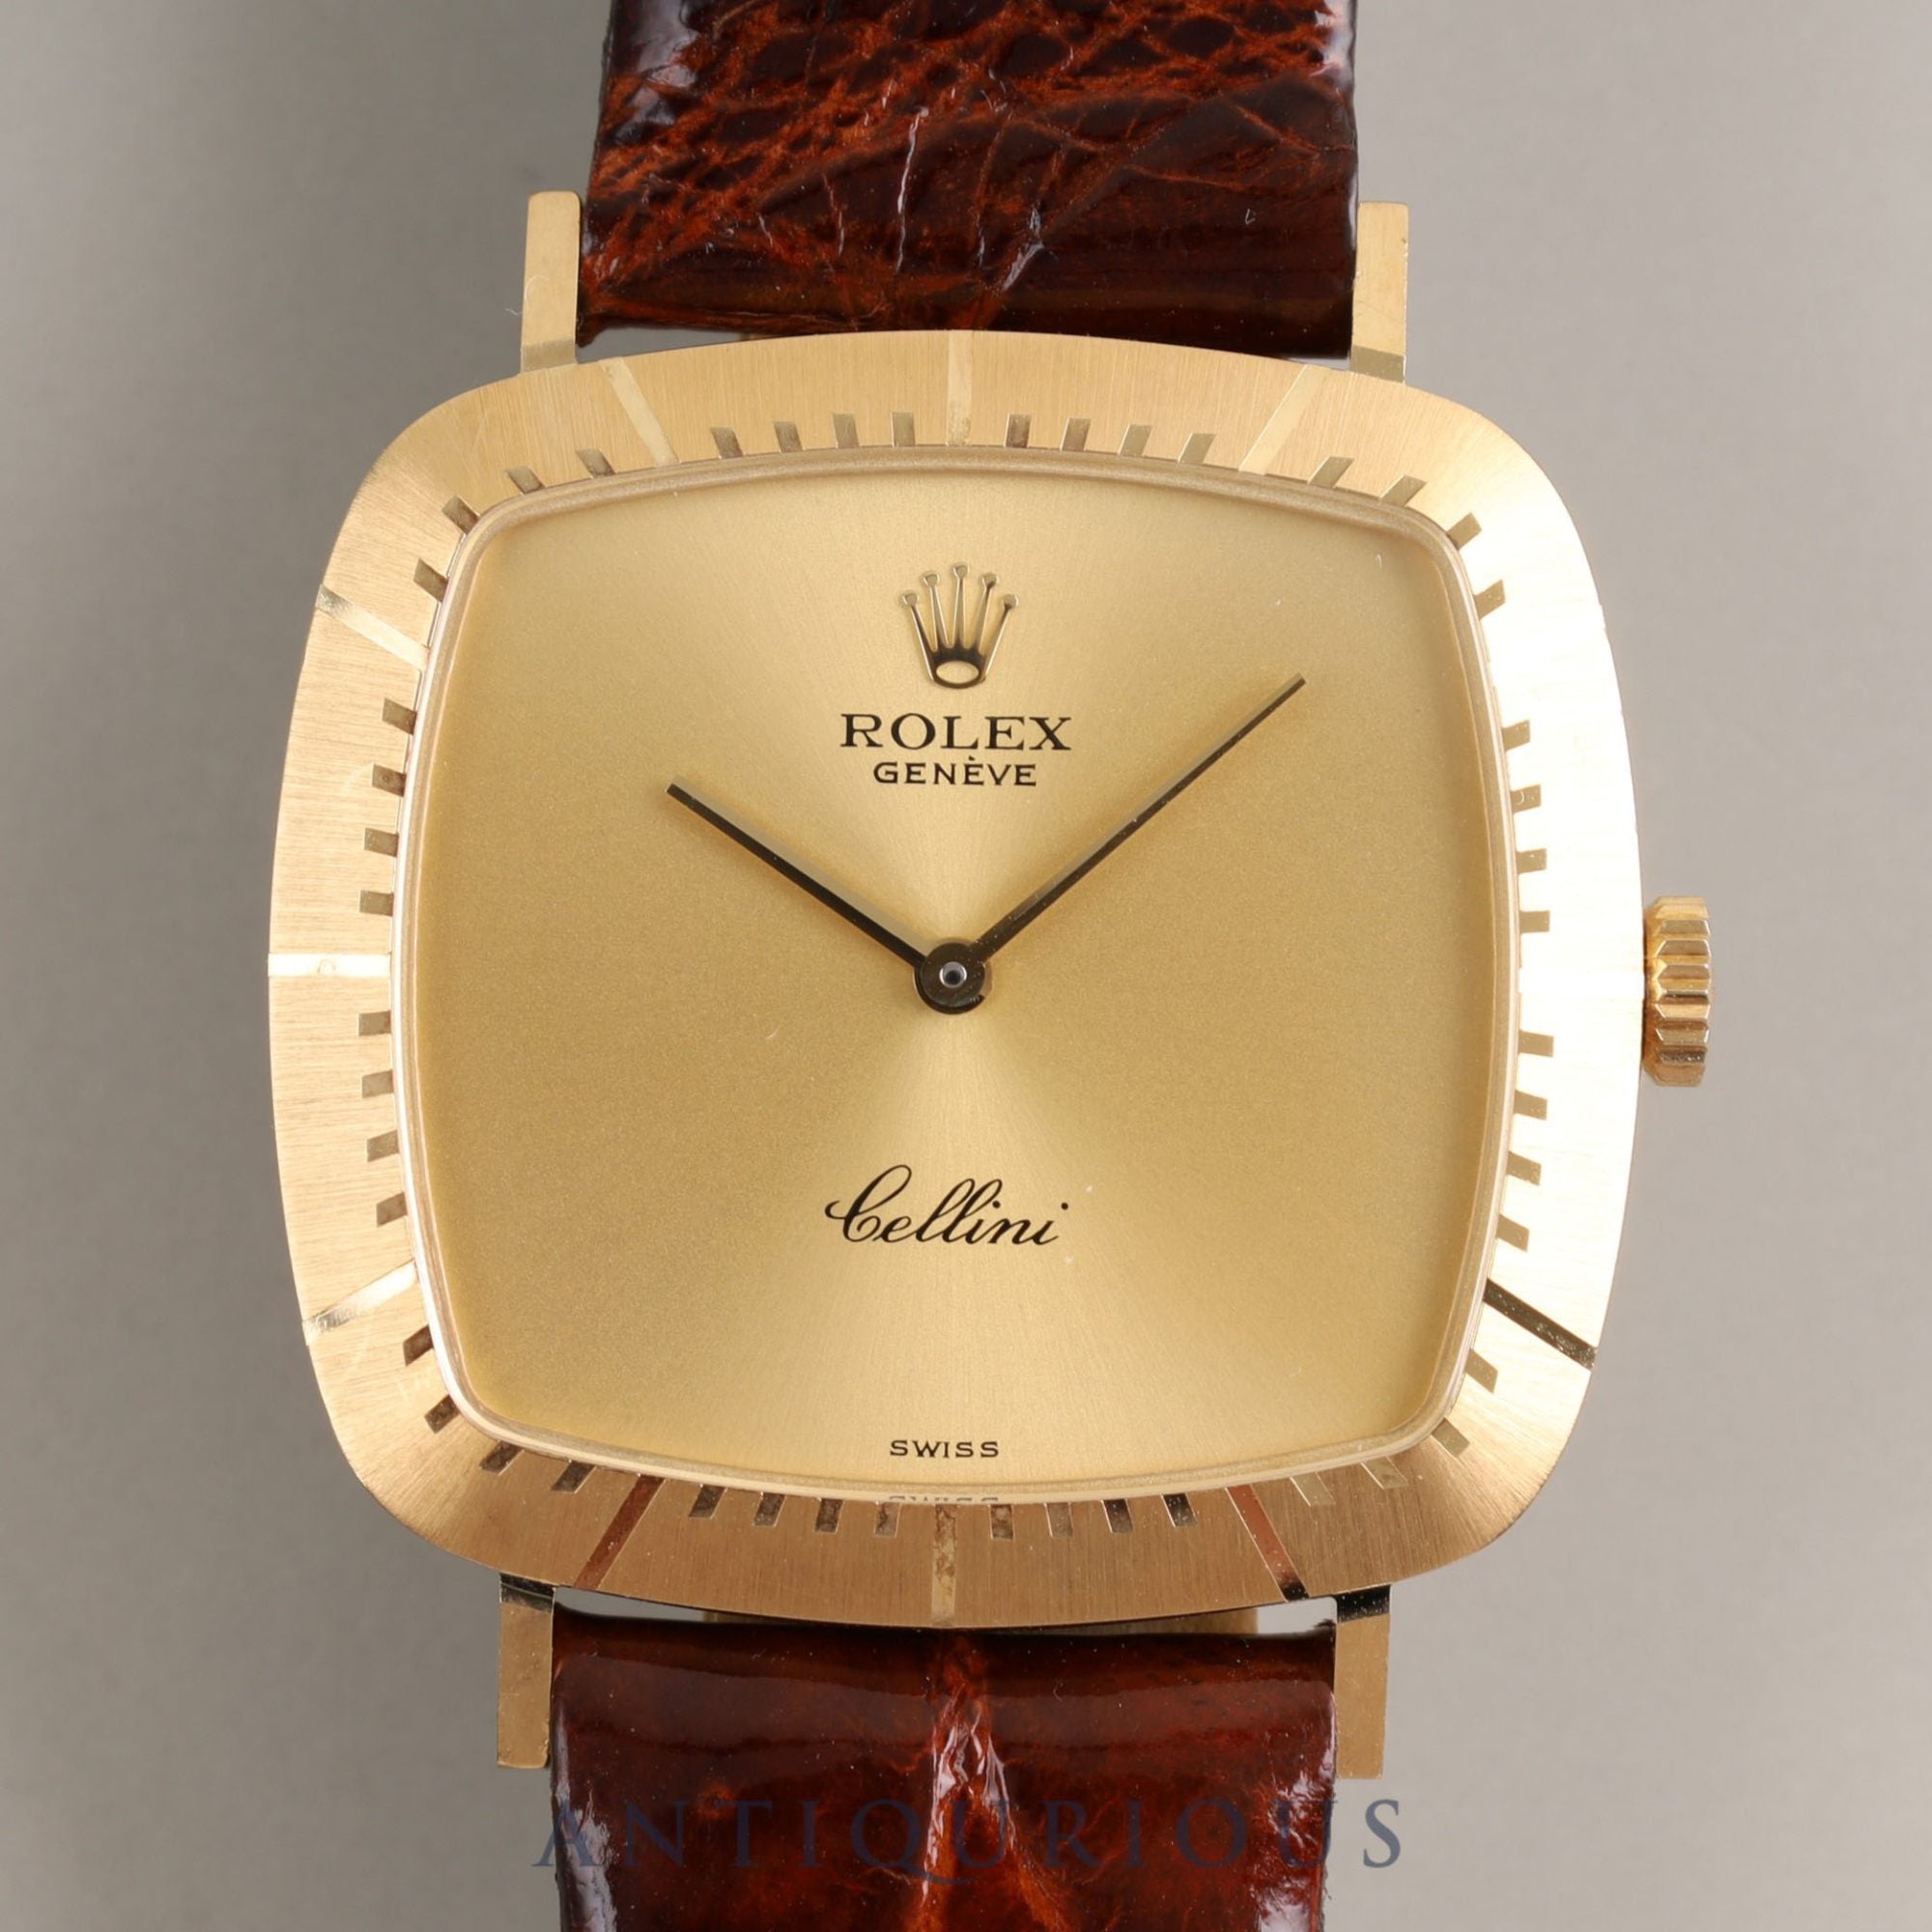 ROLEX CELLINI 4084 Manual winding Cal.1601 18KYG Leather Genuine buckle Gold dial L serial number (1990) Warranty (1990)